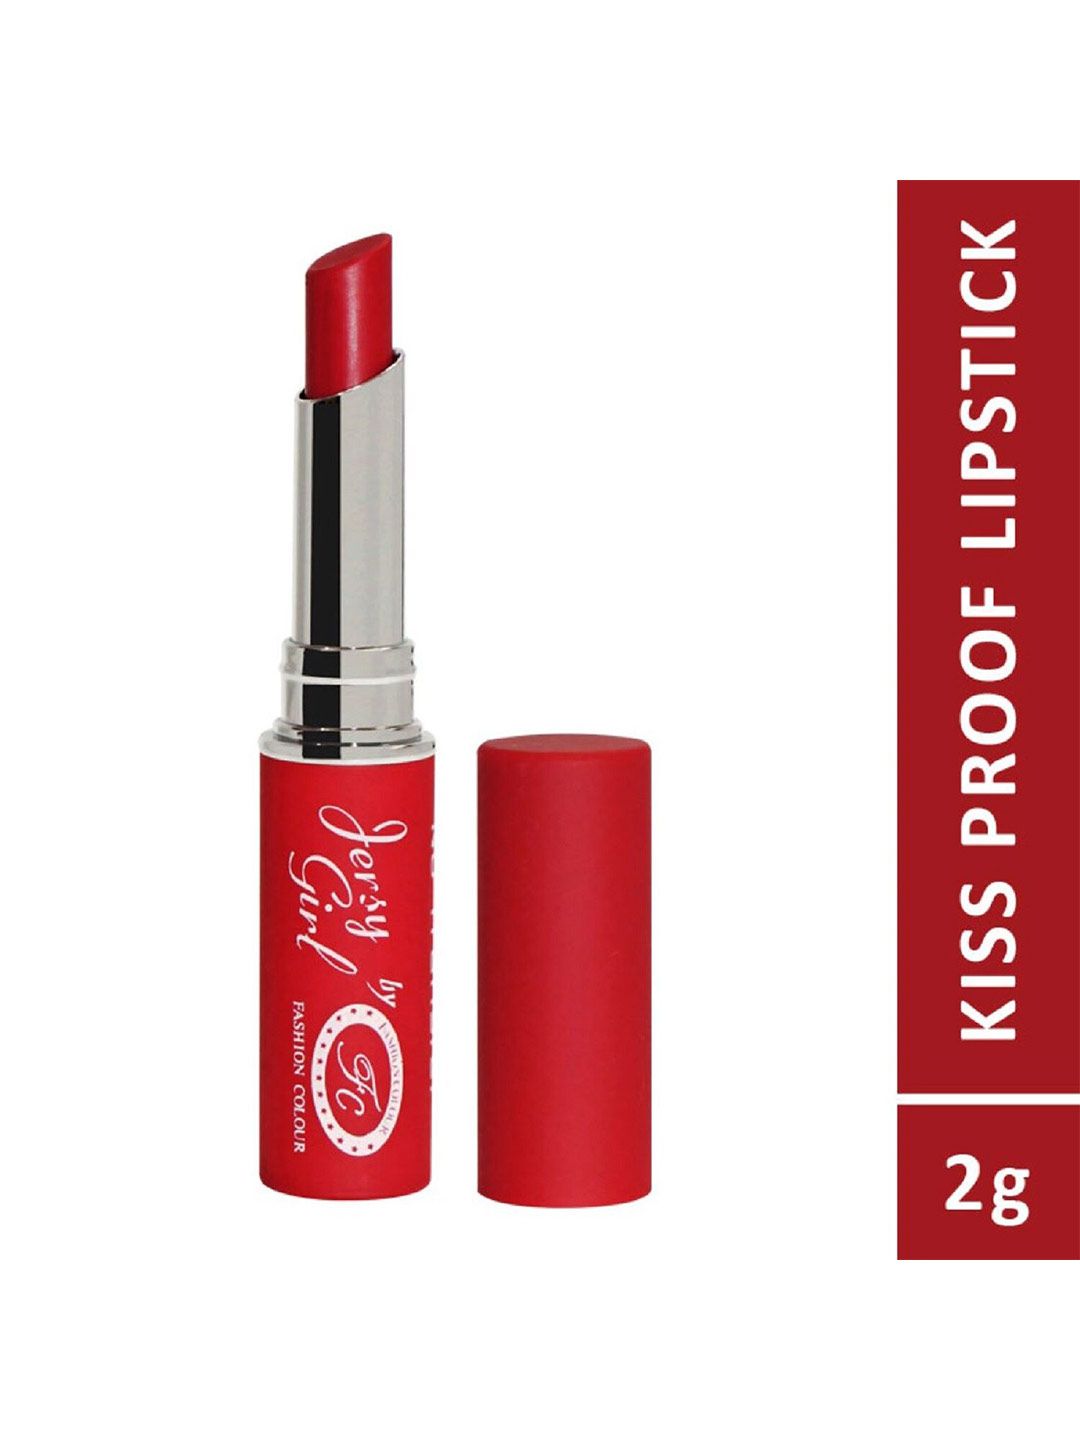 Fashion Colour Jersy Girl Kiss Proof No Transfer Matte Lipstick 2 g - Lotus red 7 Price in India